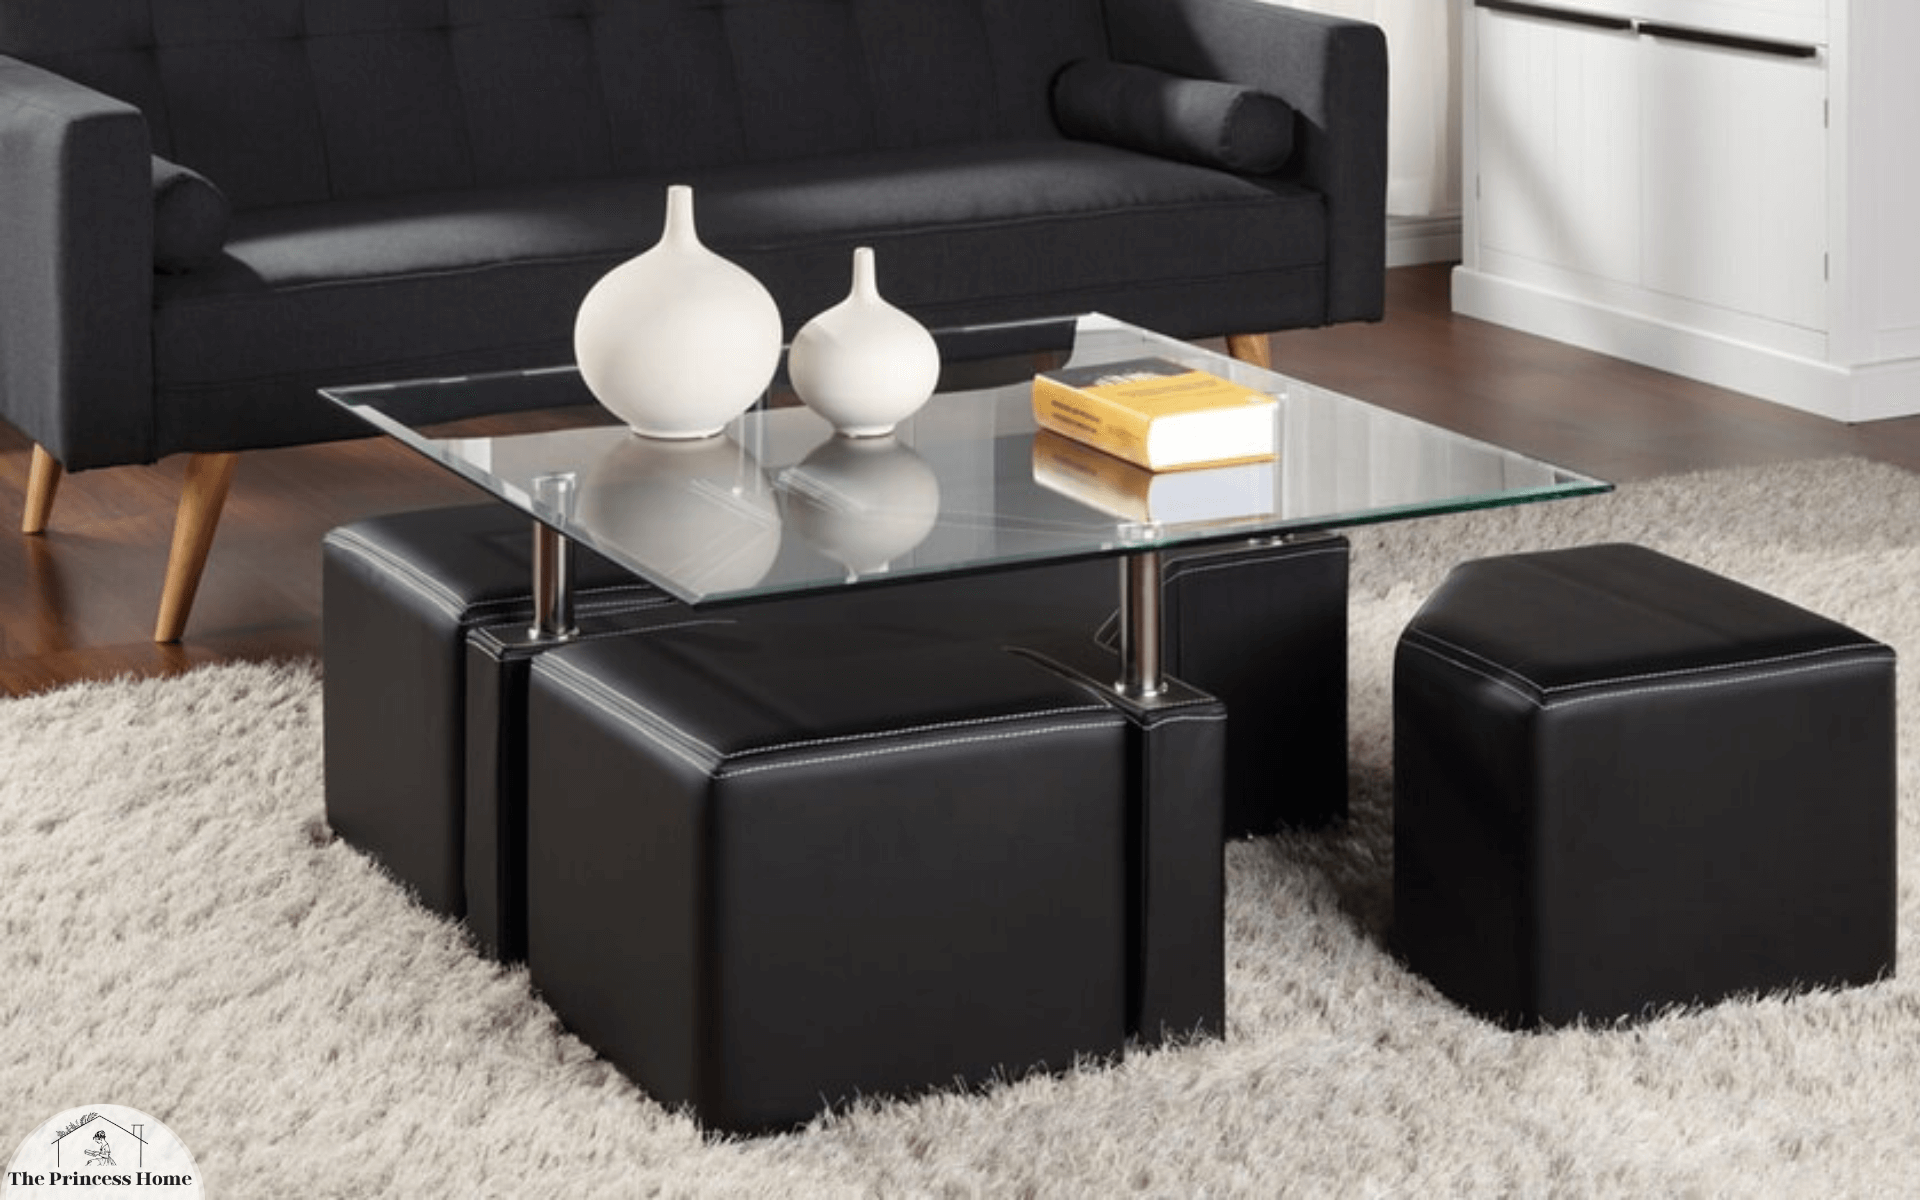 Invest in Multi-Functional Furniture